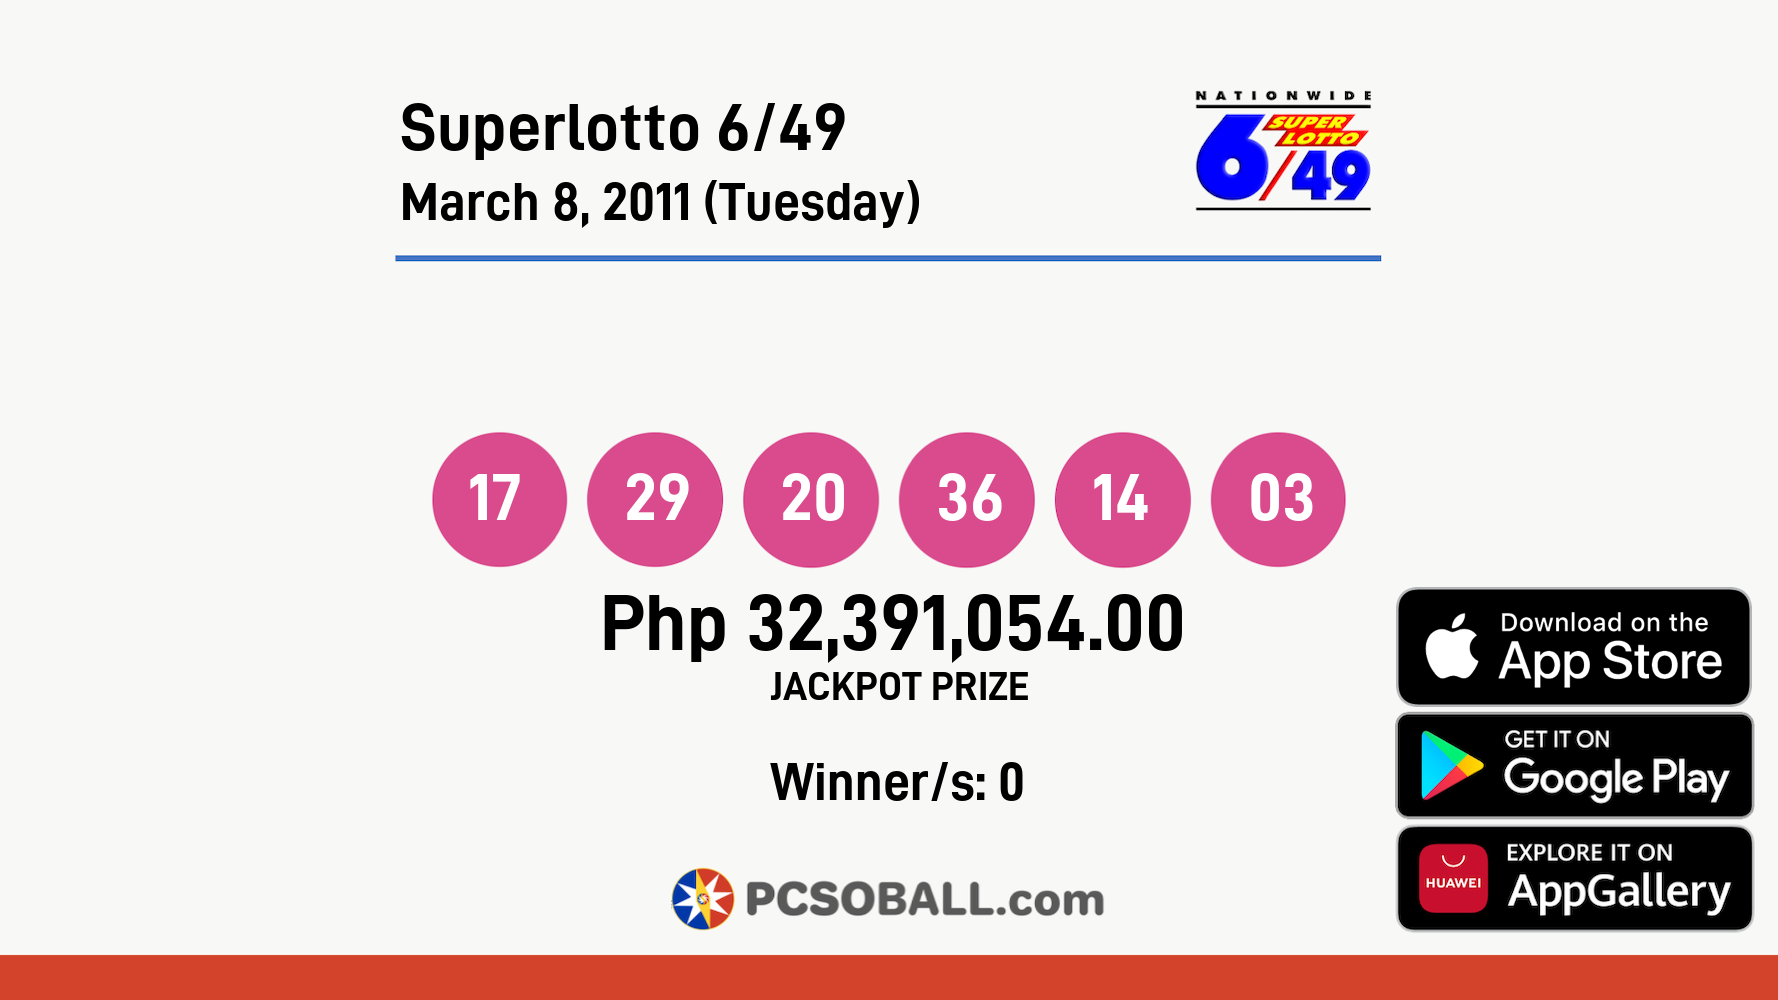 Superlotto 6/49 March 8, 2011 (Tuesday) Result